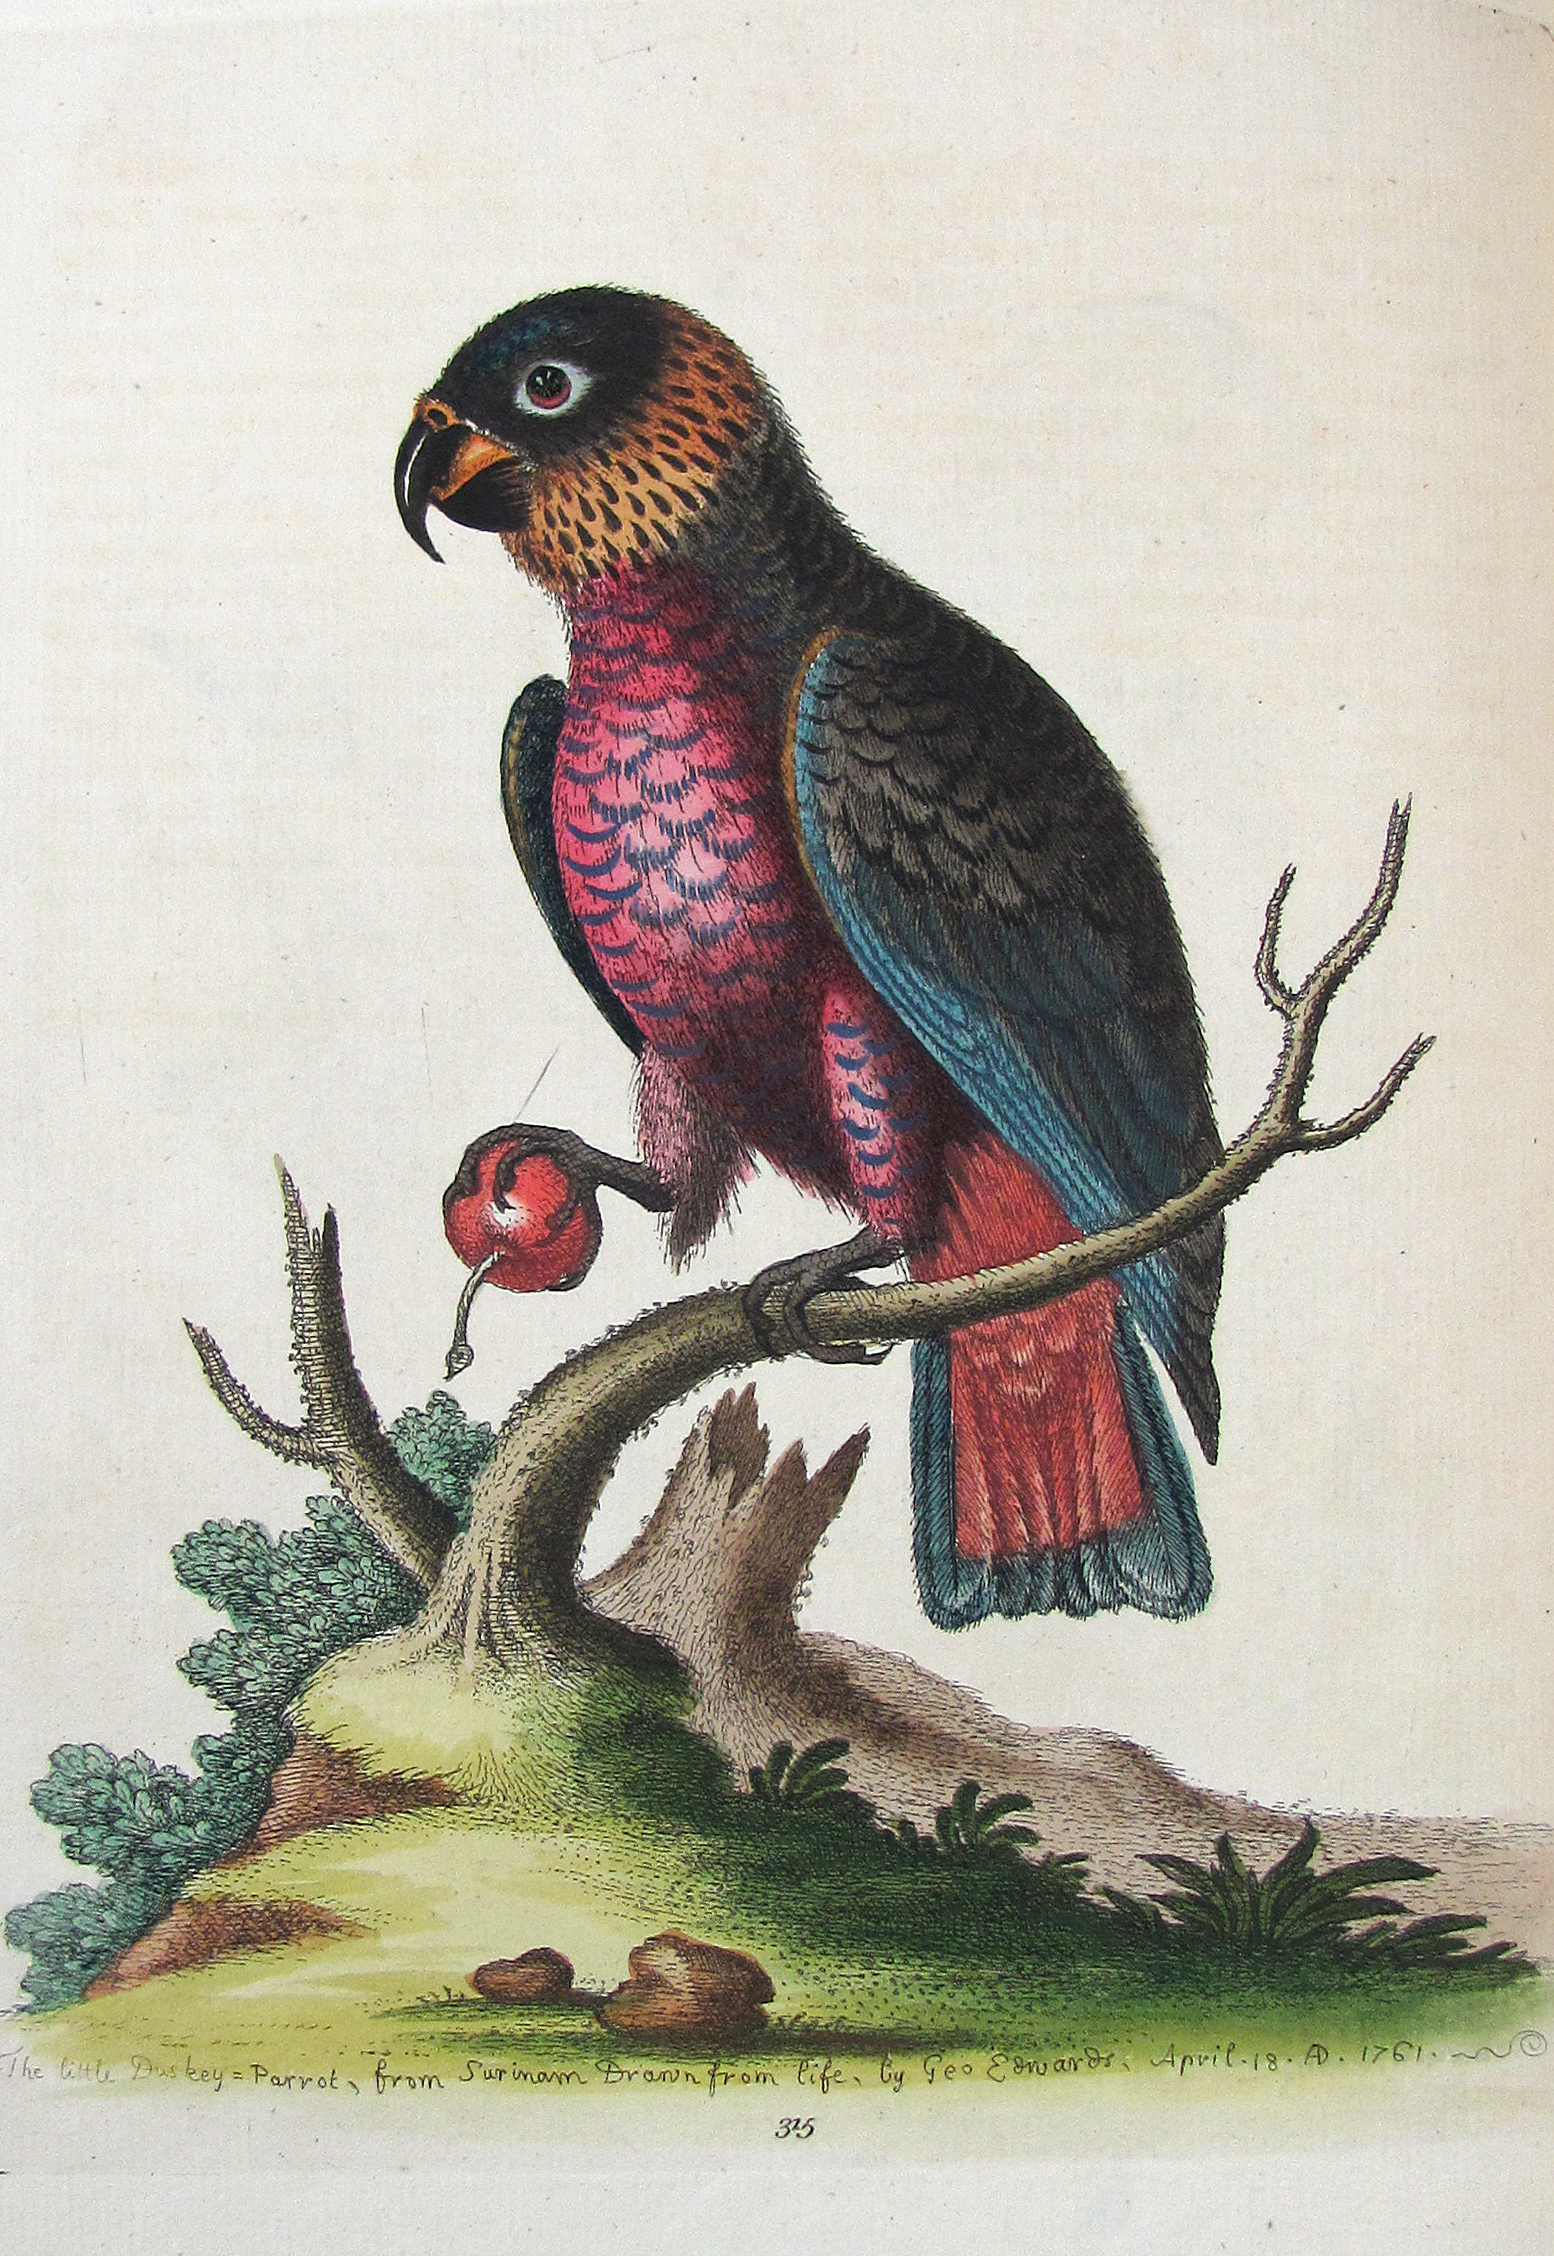 Edwards, George, A Natural History of uncommon Birds and some other rare and undescribed Animals, Quadrupeds, Reptiles, Fishes, Insects… FORTSETZUNG: Gleanings of Natural History containing figures of Quadrupeds, Birds, Insects, Plants…